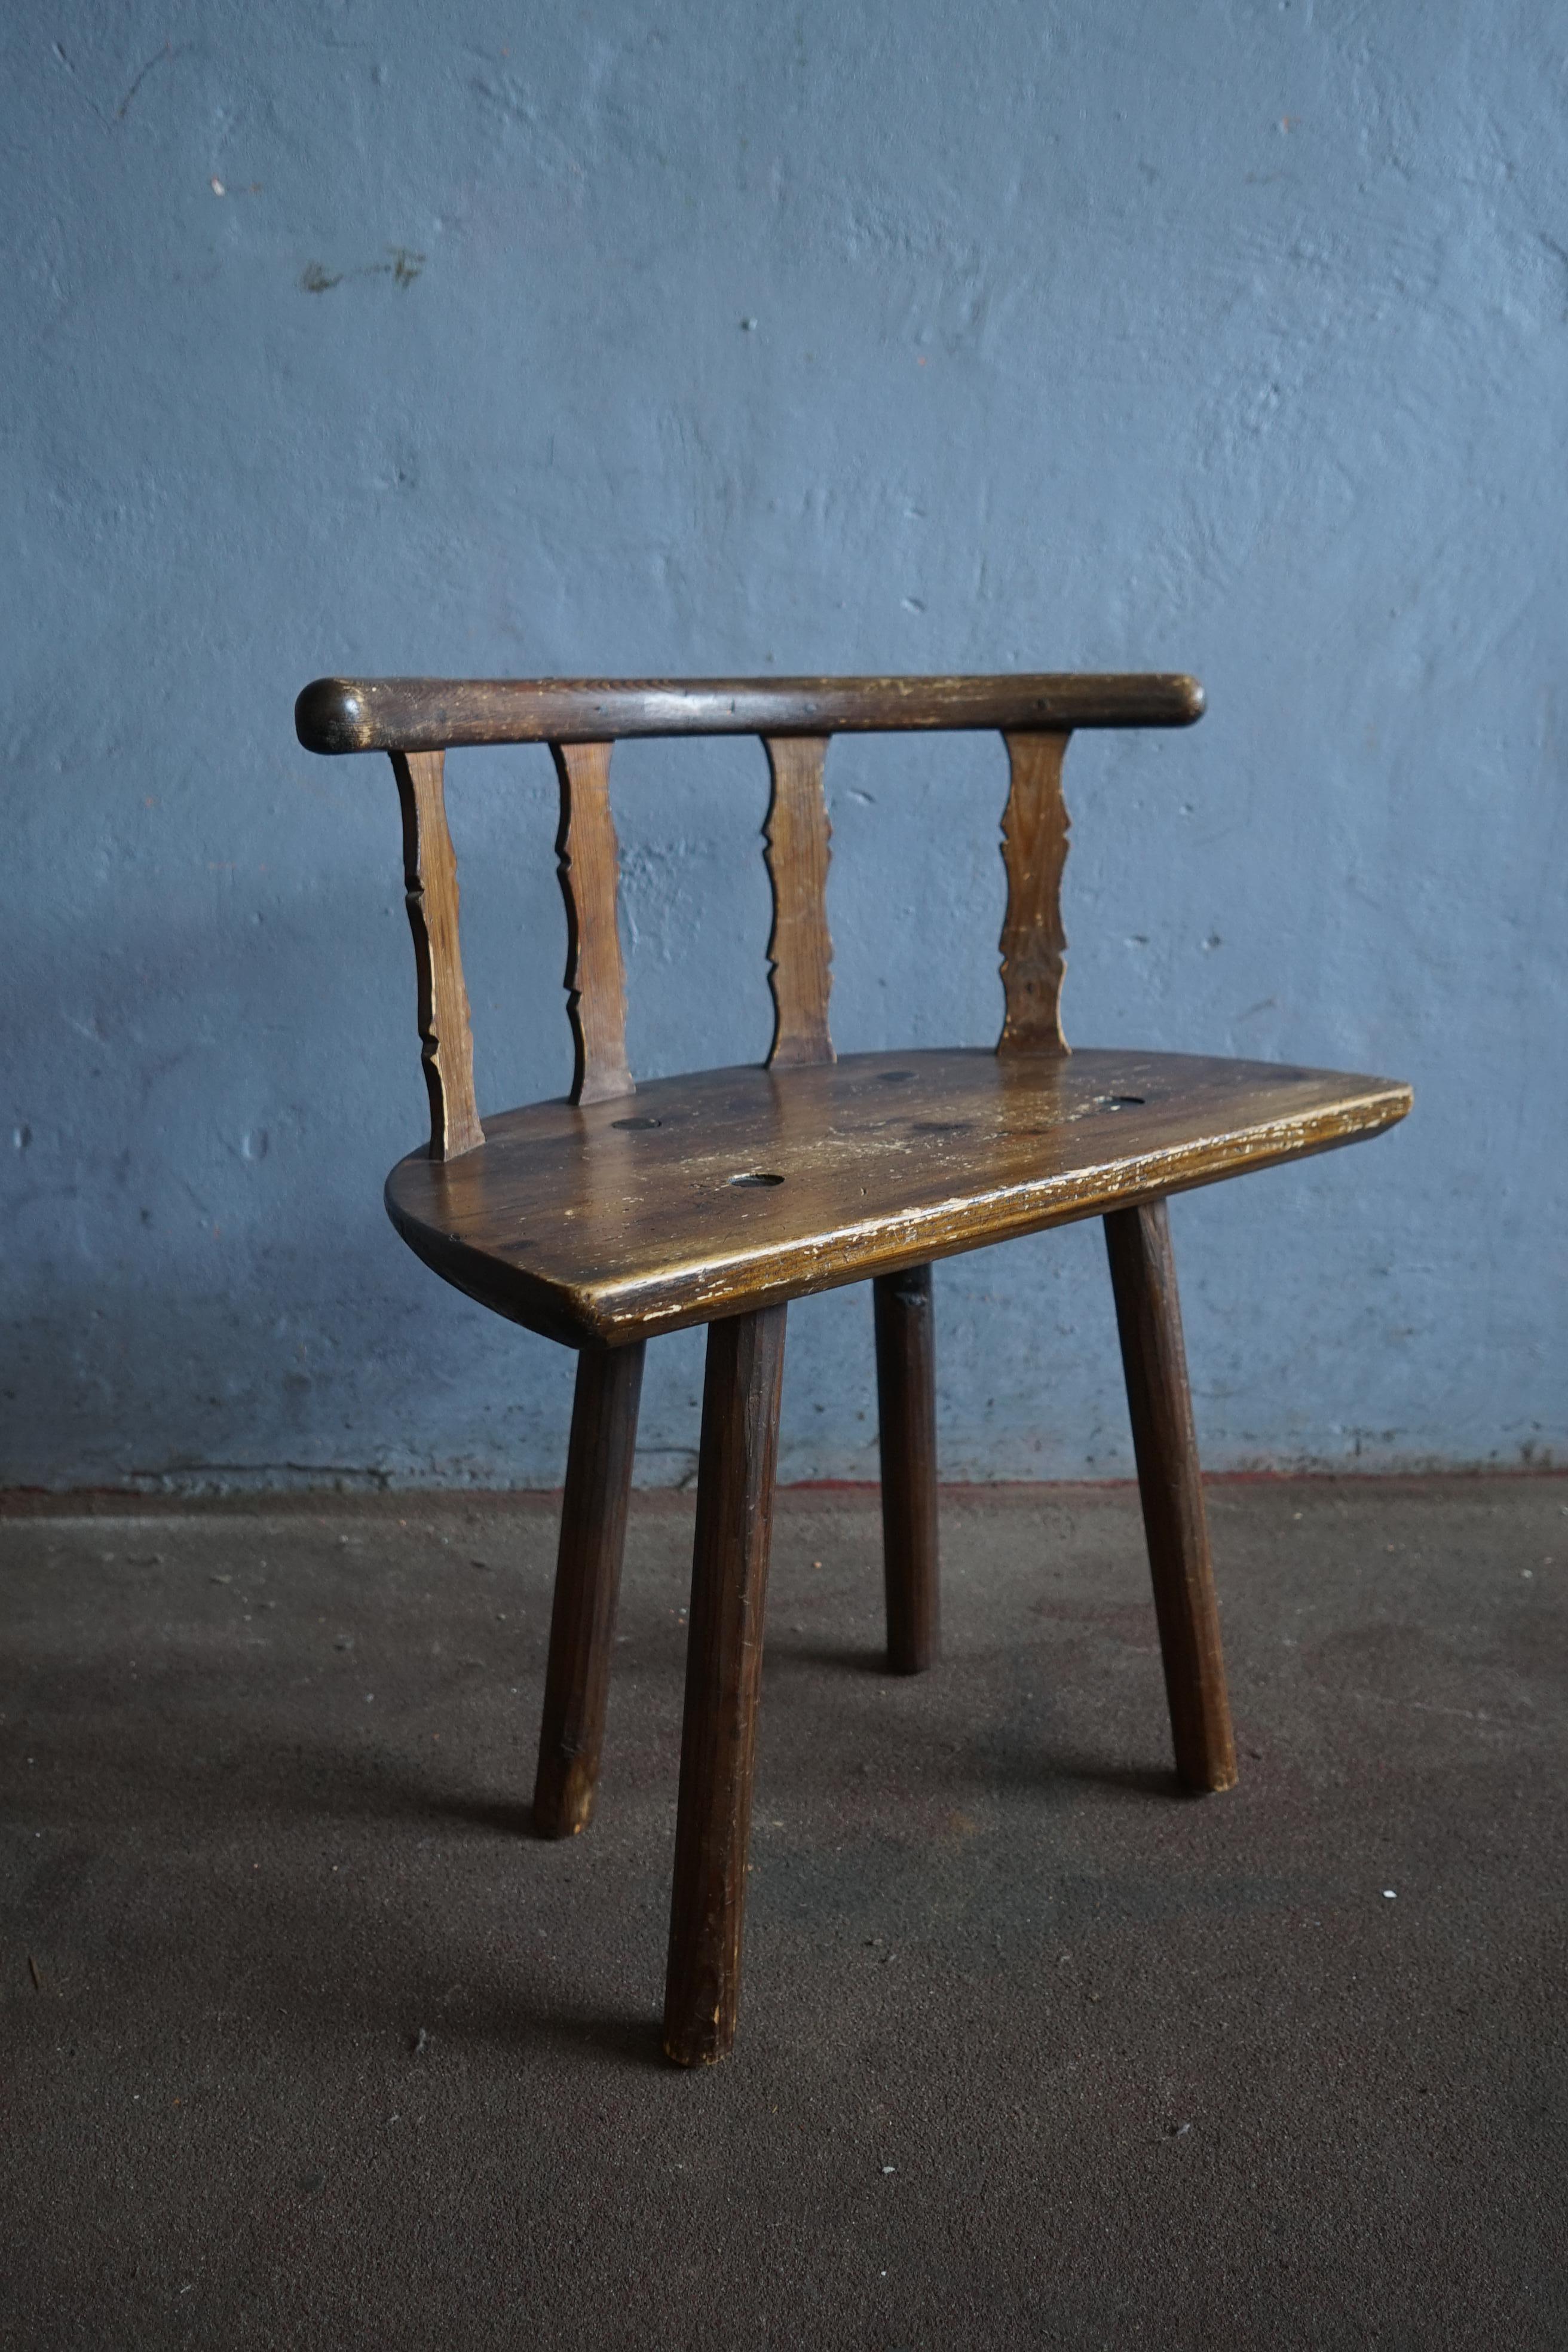 Rare Swedish folk art chair in solid dark stained wood made by a very talented craftsman in the middle of the 19th century in Sweden.

The chair has some beautiful details like the visible joints at the seat and on the backrest.

The chair is the